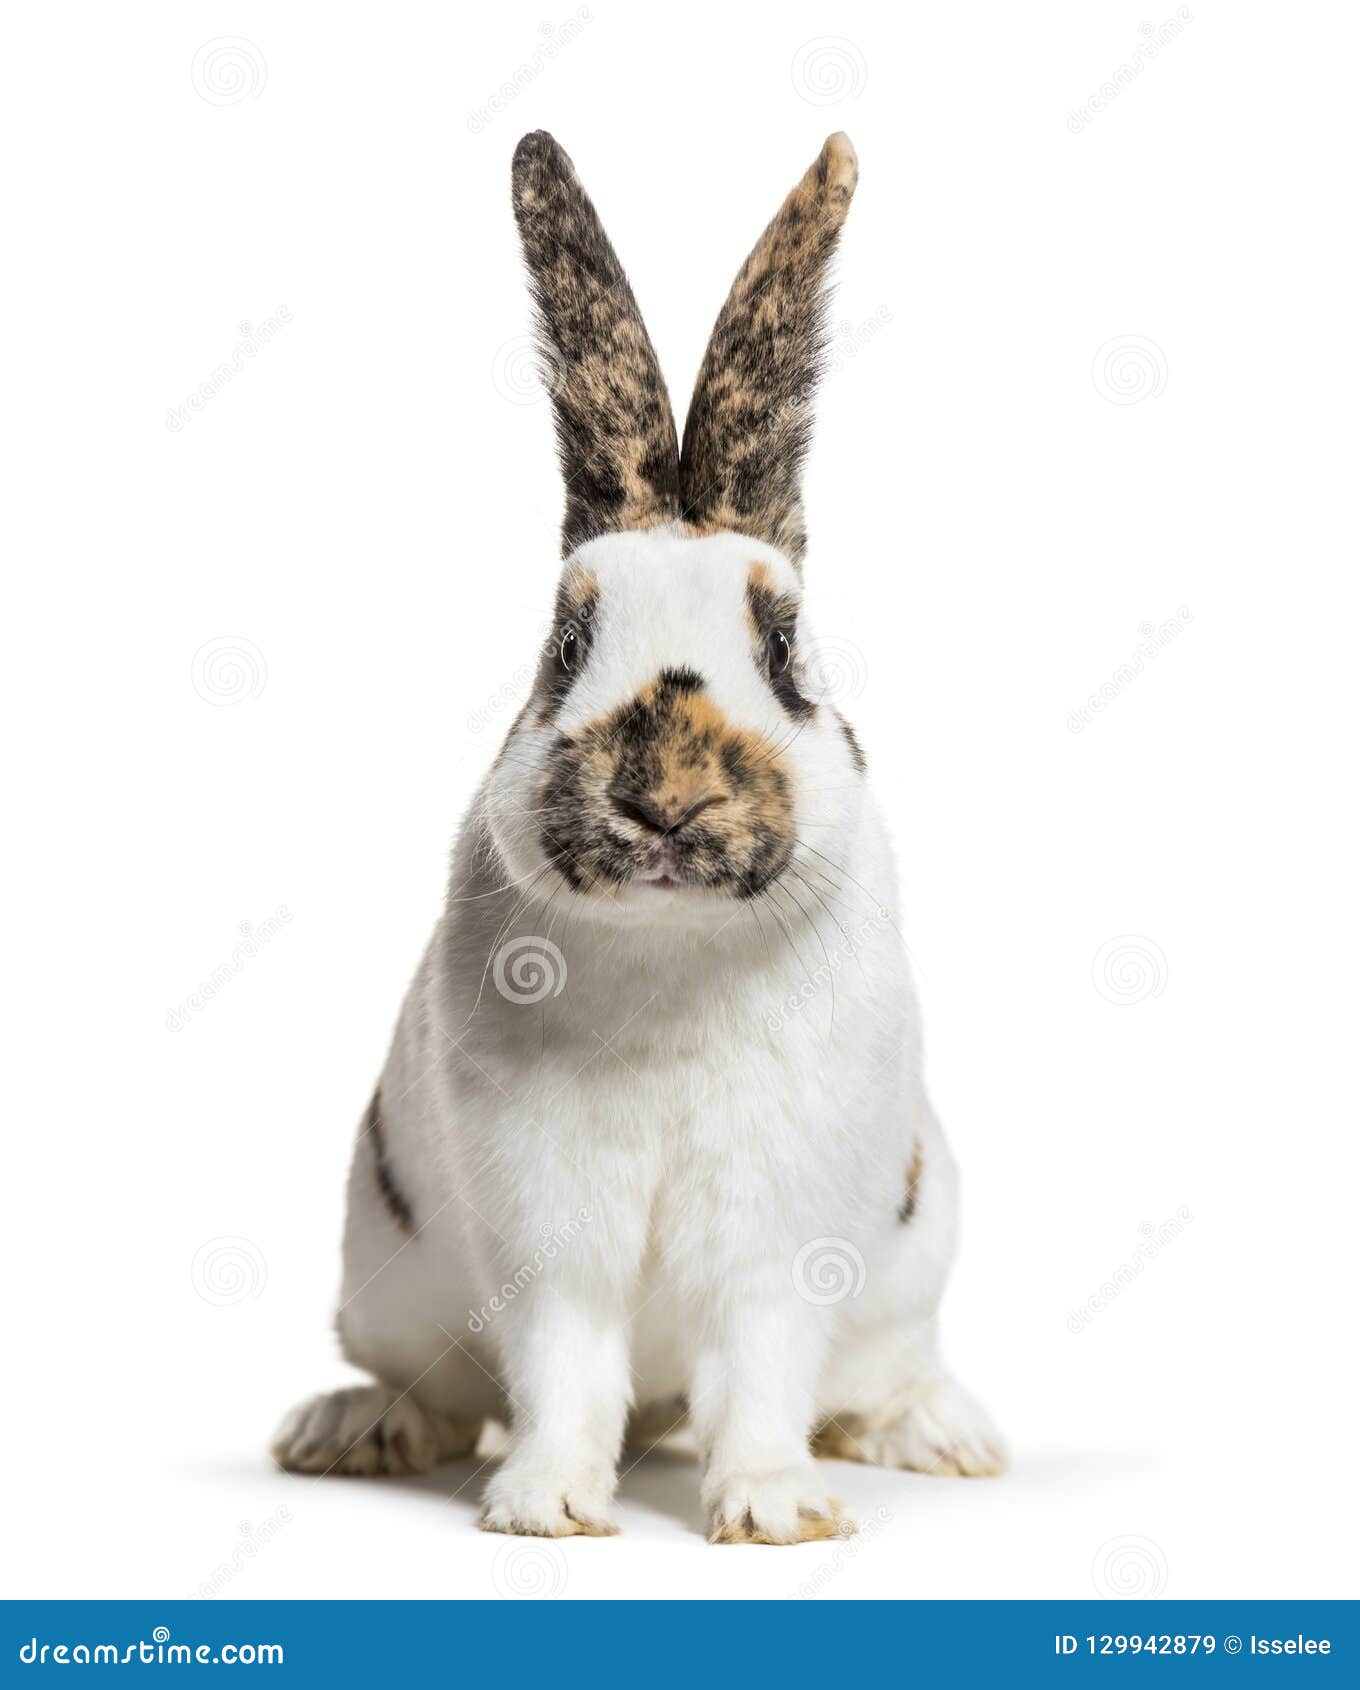 Checkered Giant Rabbit Is A Breed Of Domestic Rabbit That Origin Stock Image Image Of Length Color 129942879